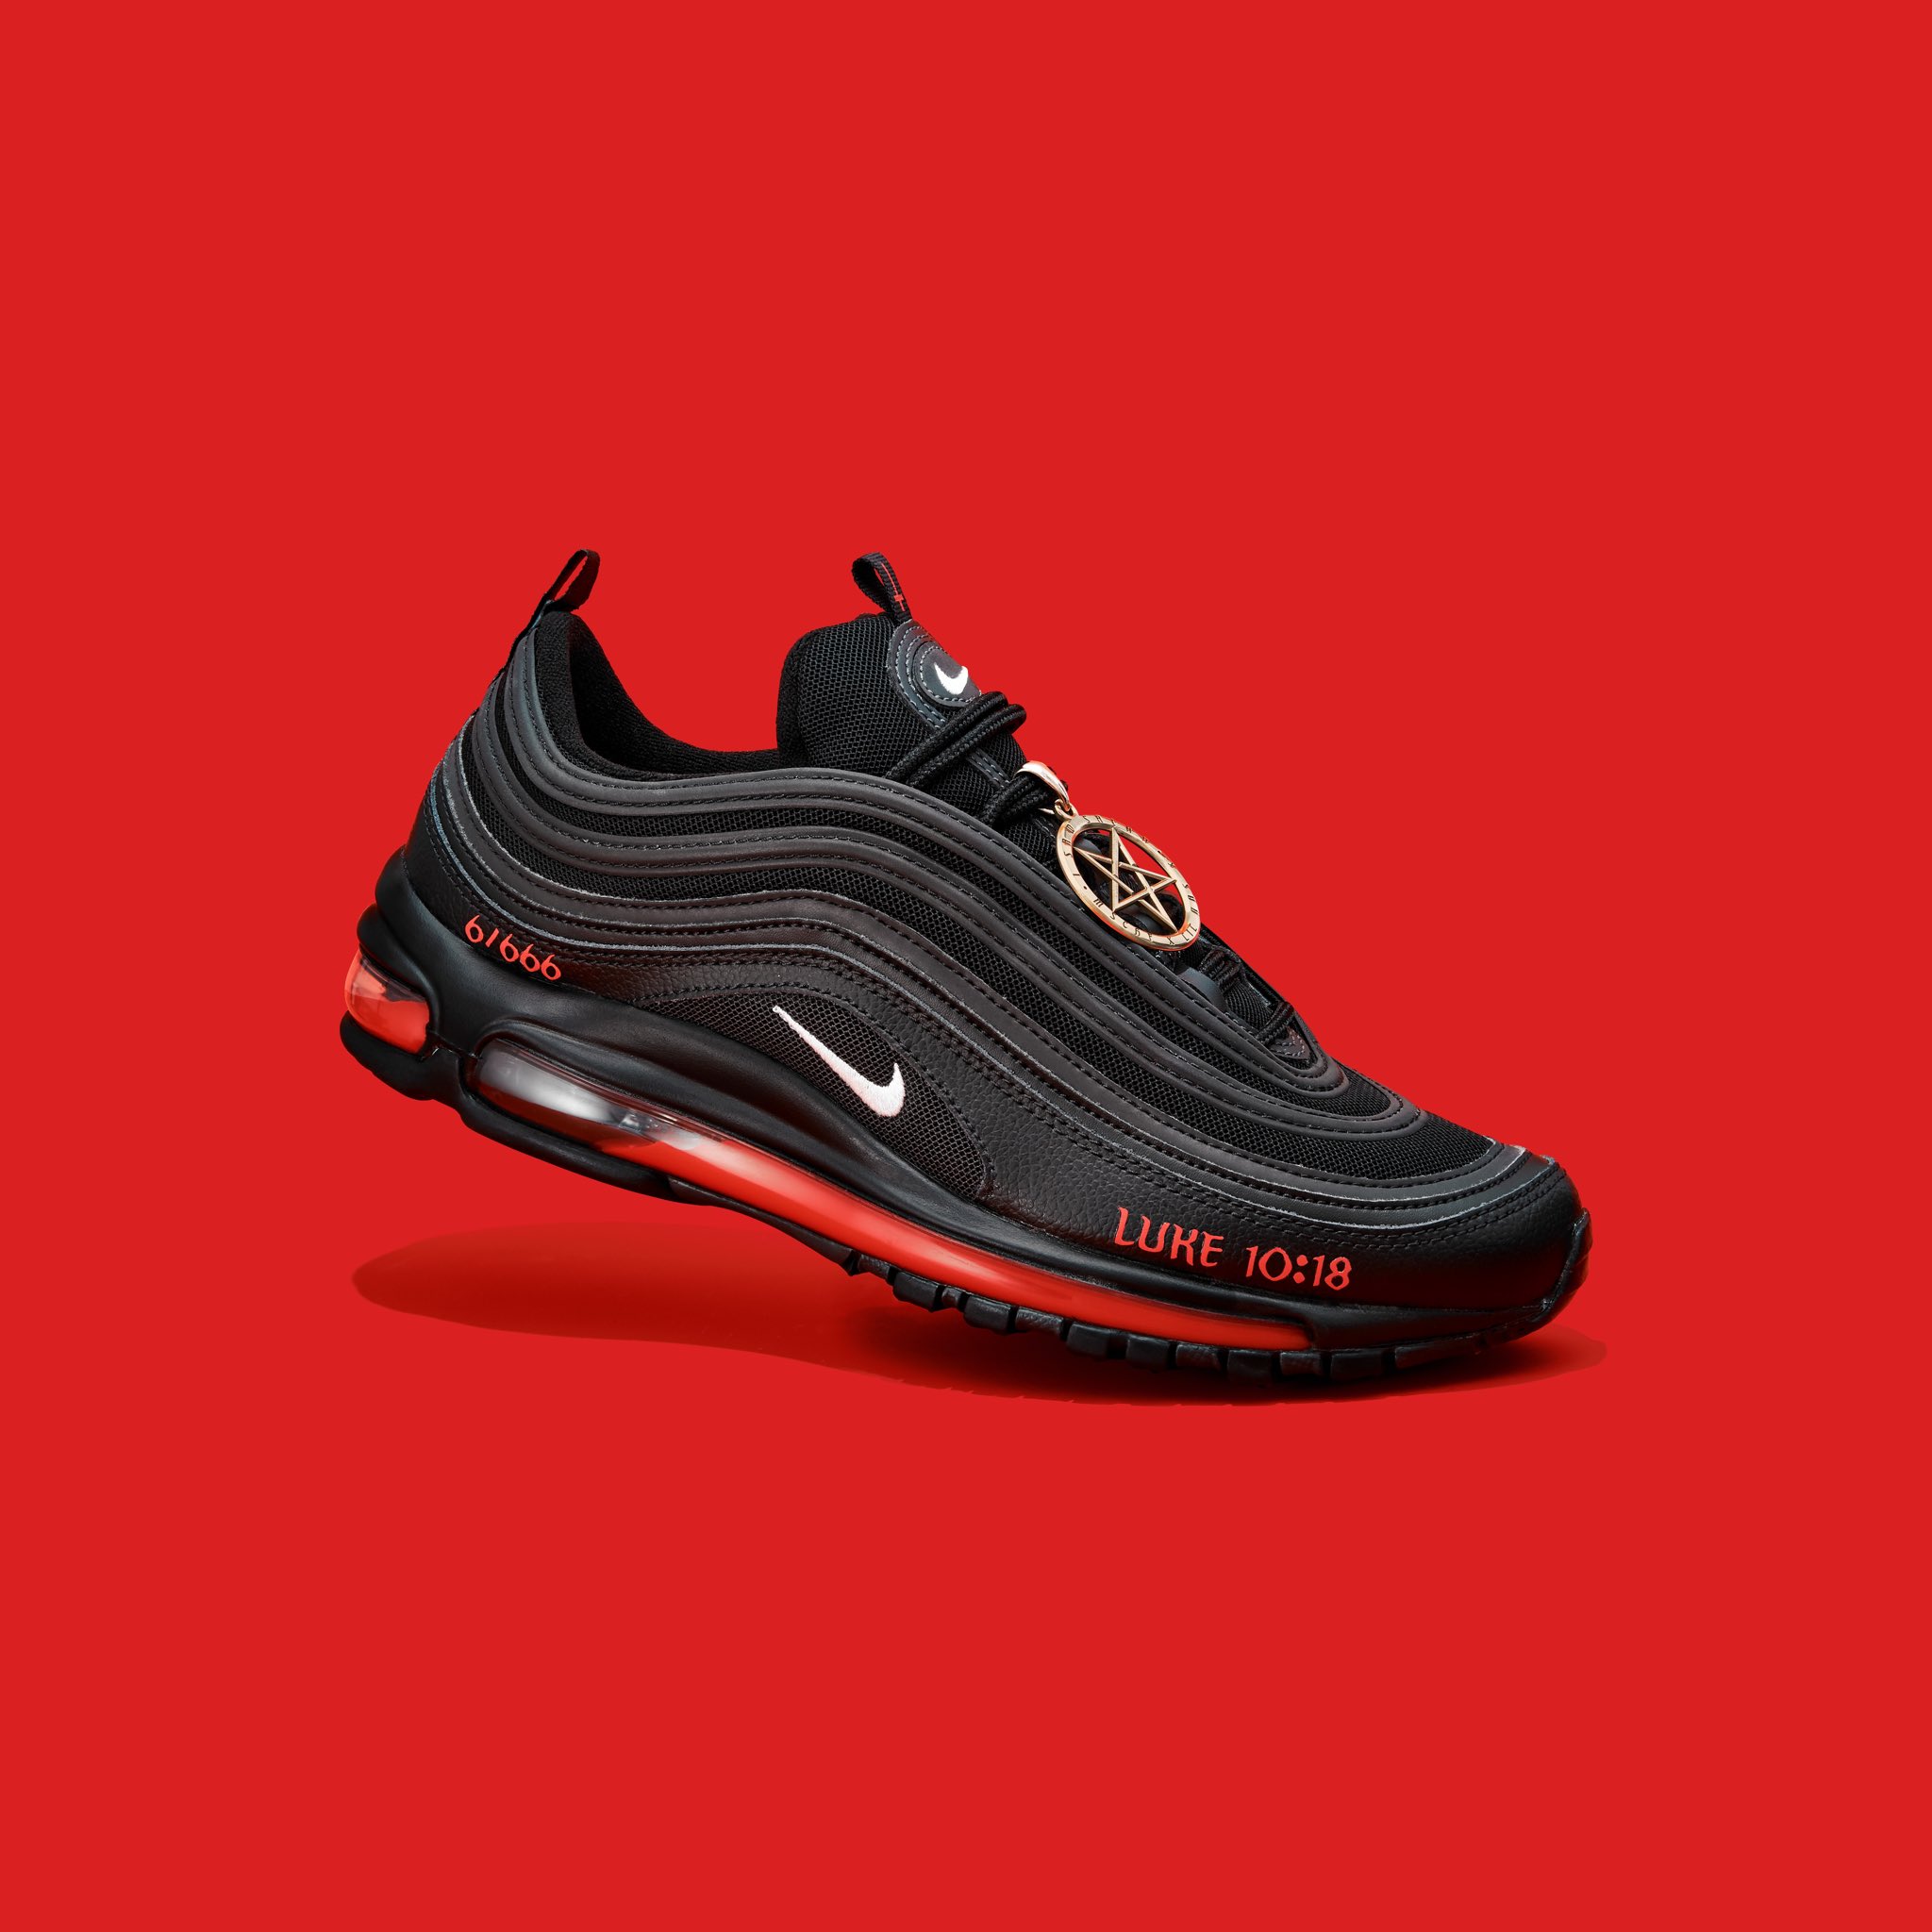 Saint Mschf X Lil Nas X Satan Shoes Nike Air Max 97 Contains 60cc Ink And 1 Drop Of Human Blood 666 Pairs Individually Numbered 1 018 March 29th 21 T Co Abmzhk5zta